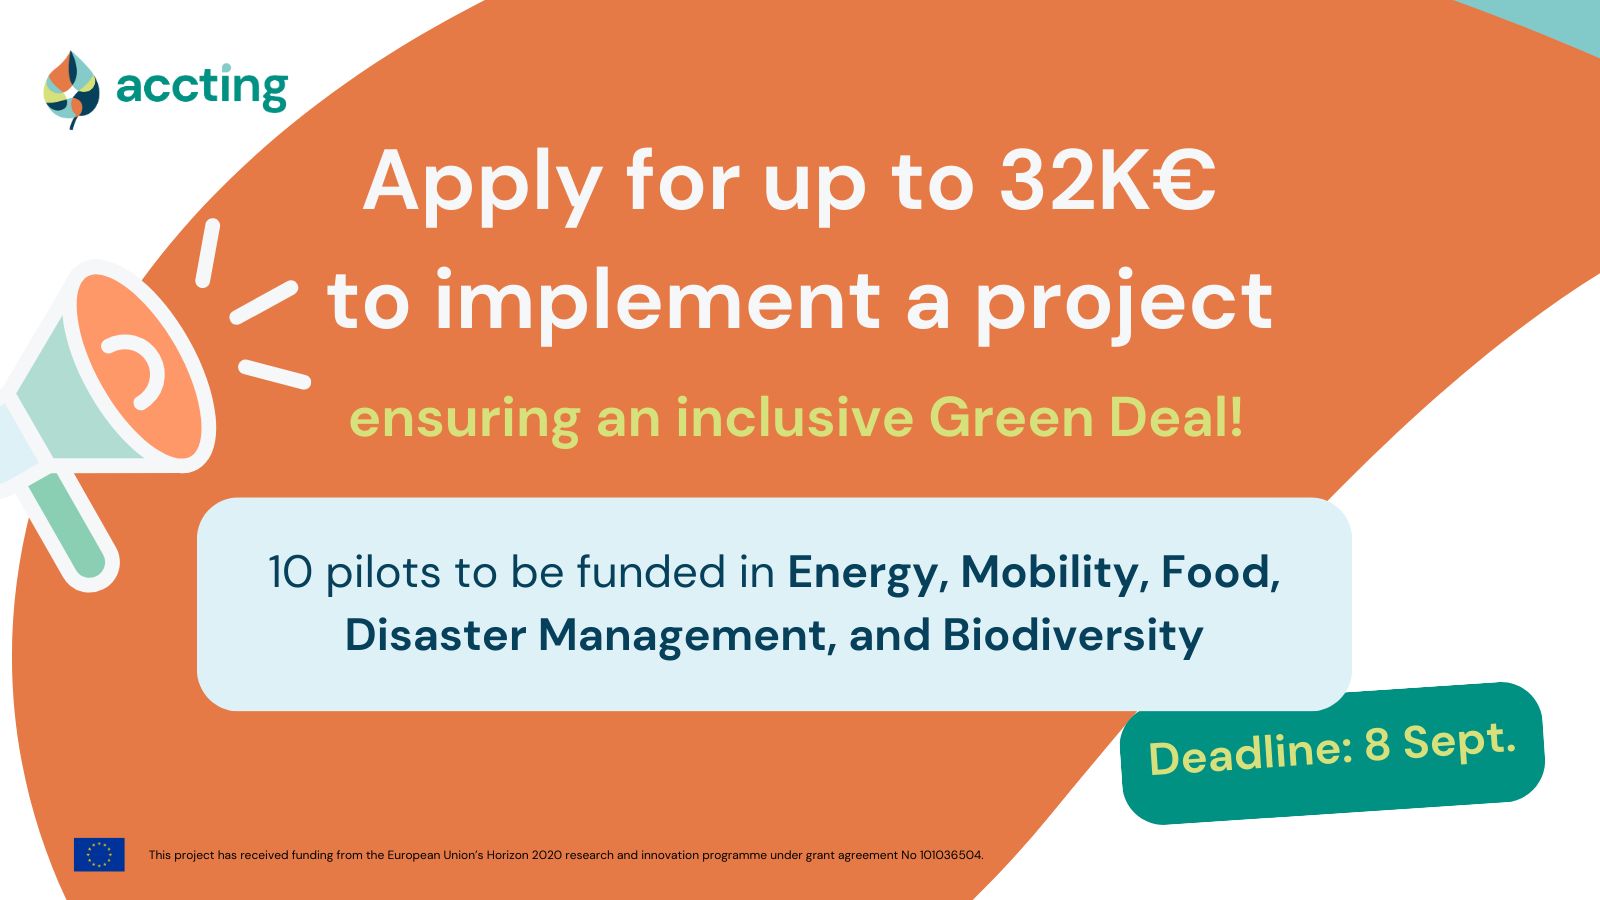 Funding Opportunity: The ACCTING project will be funding 10 pilot projects related to the EU Green Deal